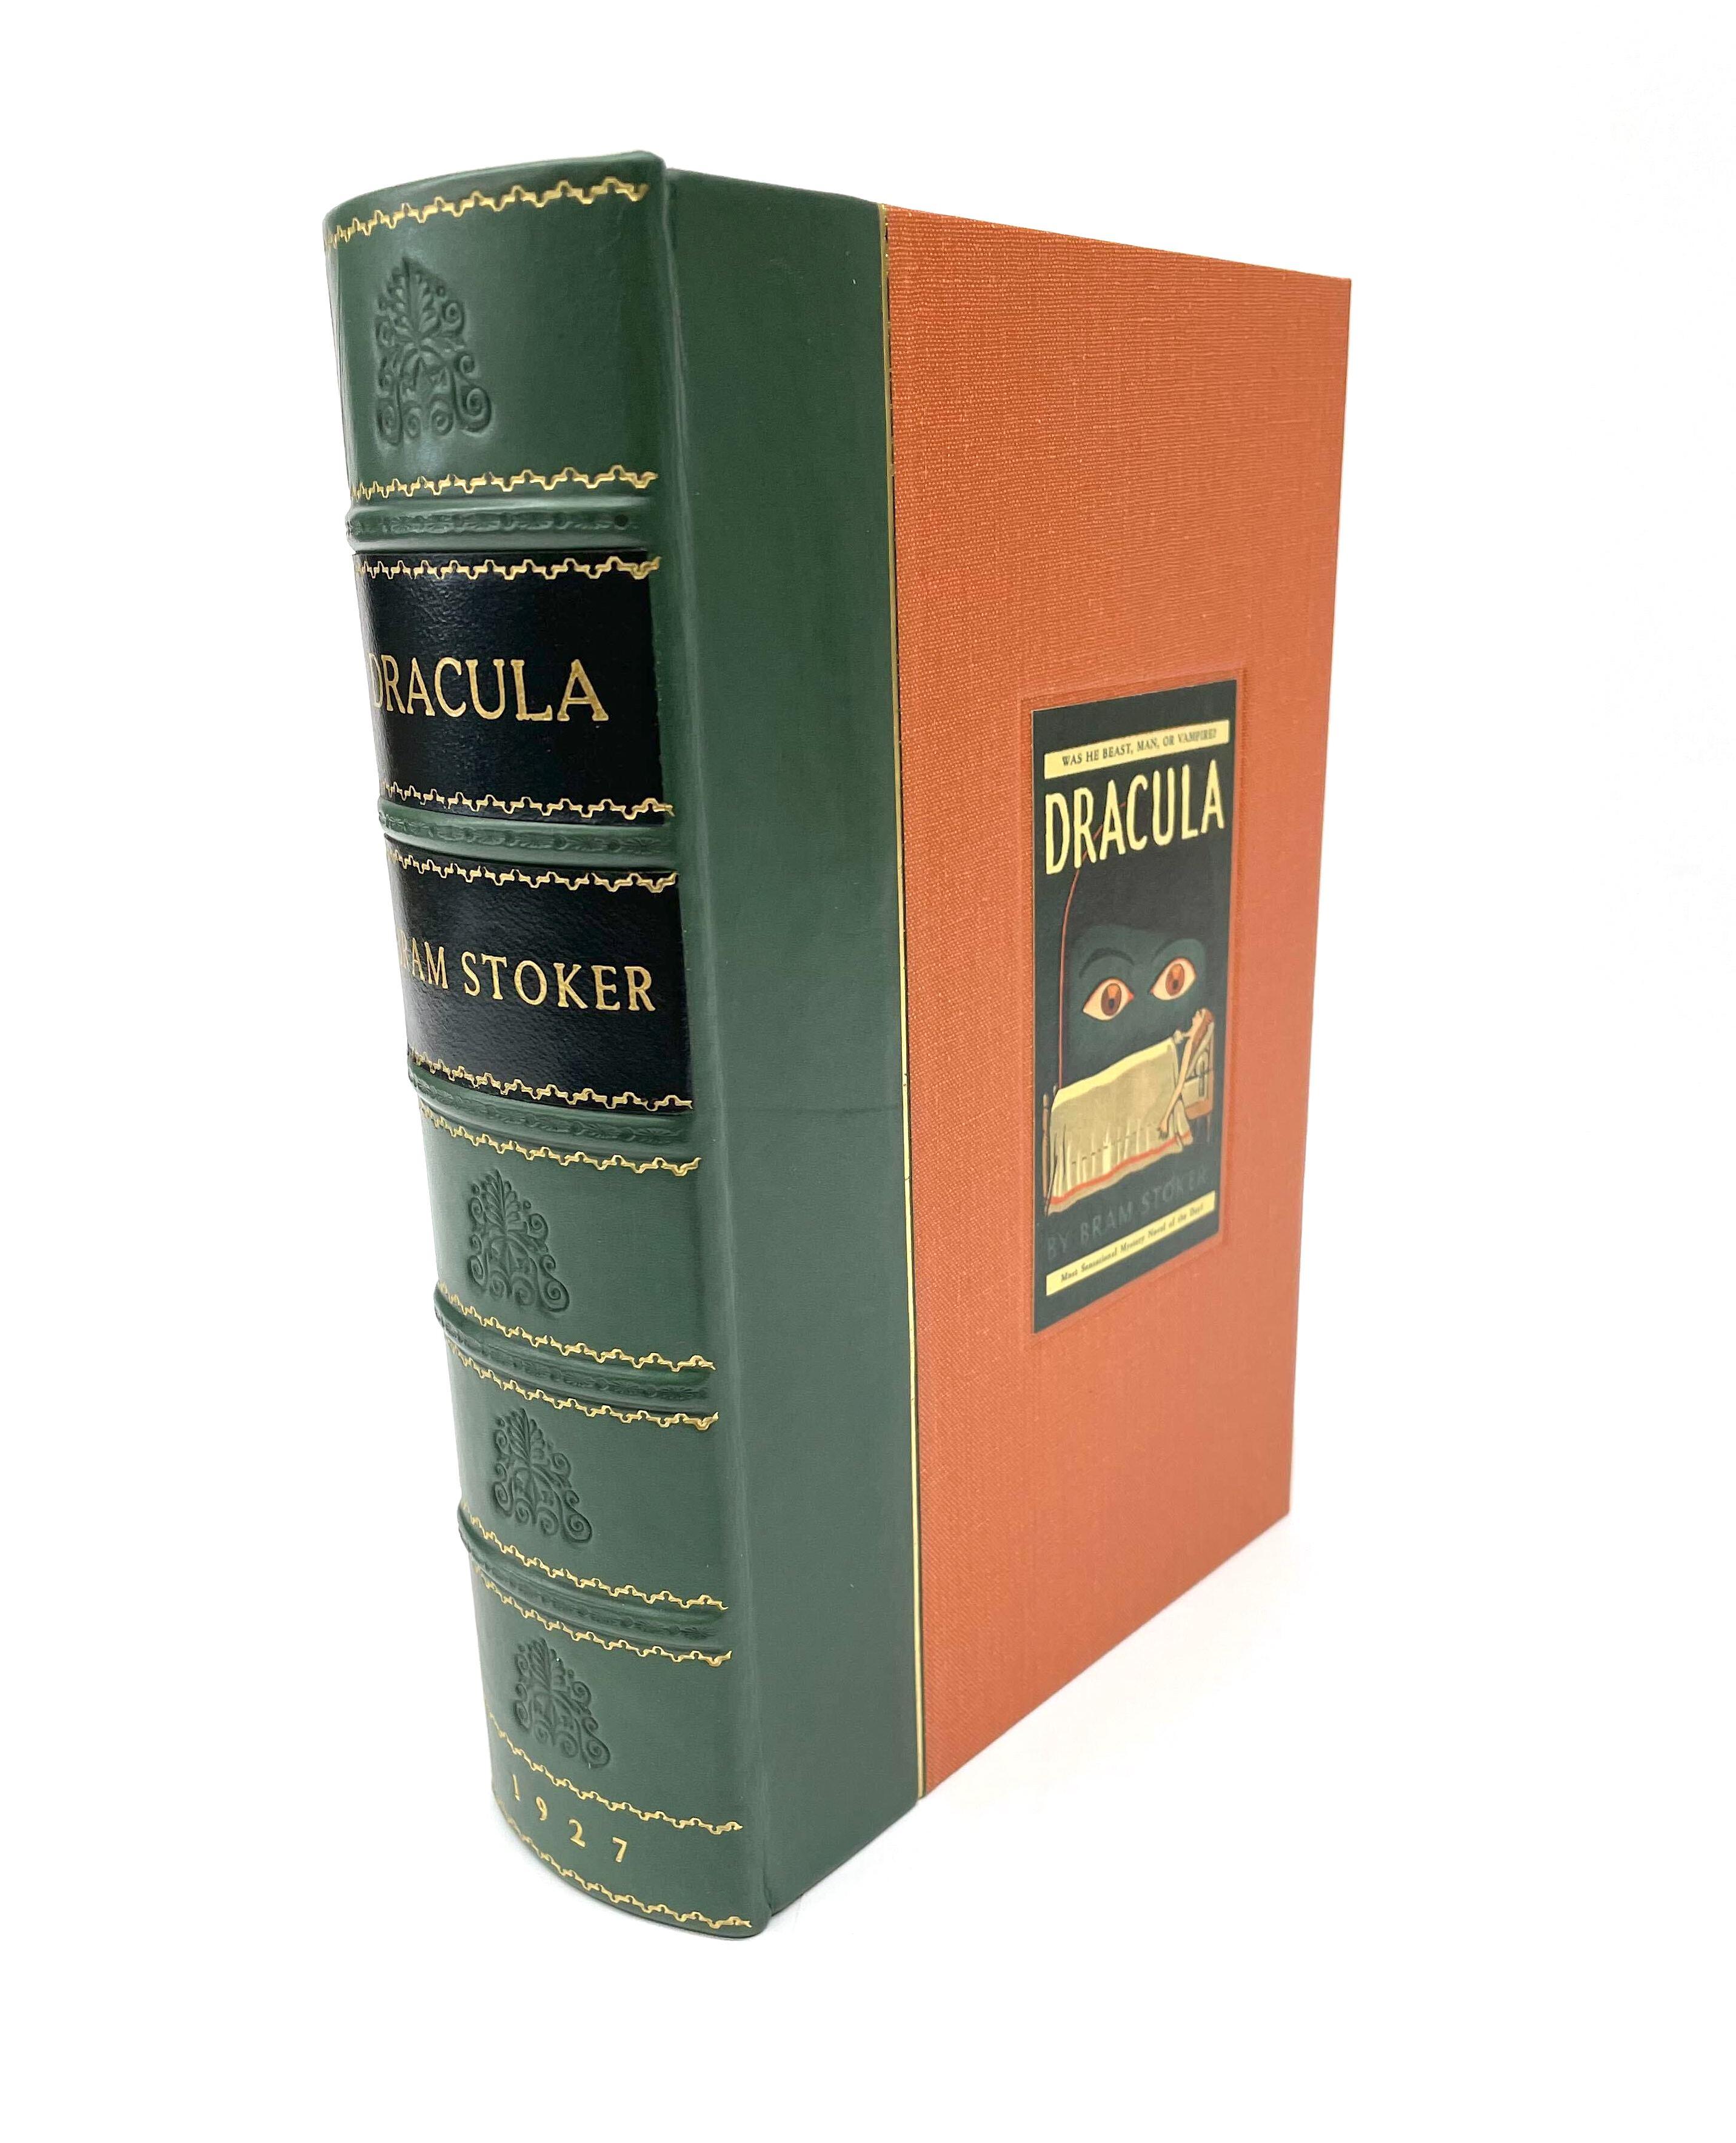 Dracula by Bram Stoker, First Grosset & Dunlap Edition, 1927 For Sale 3